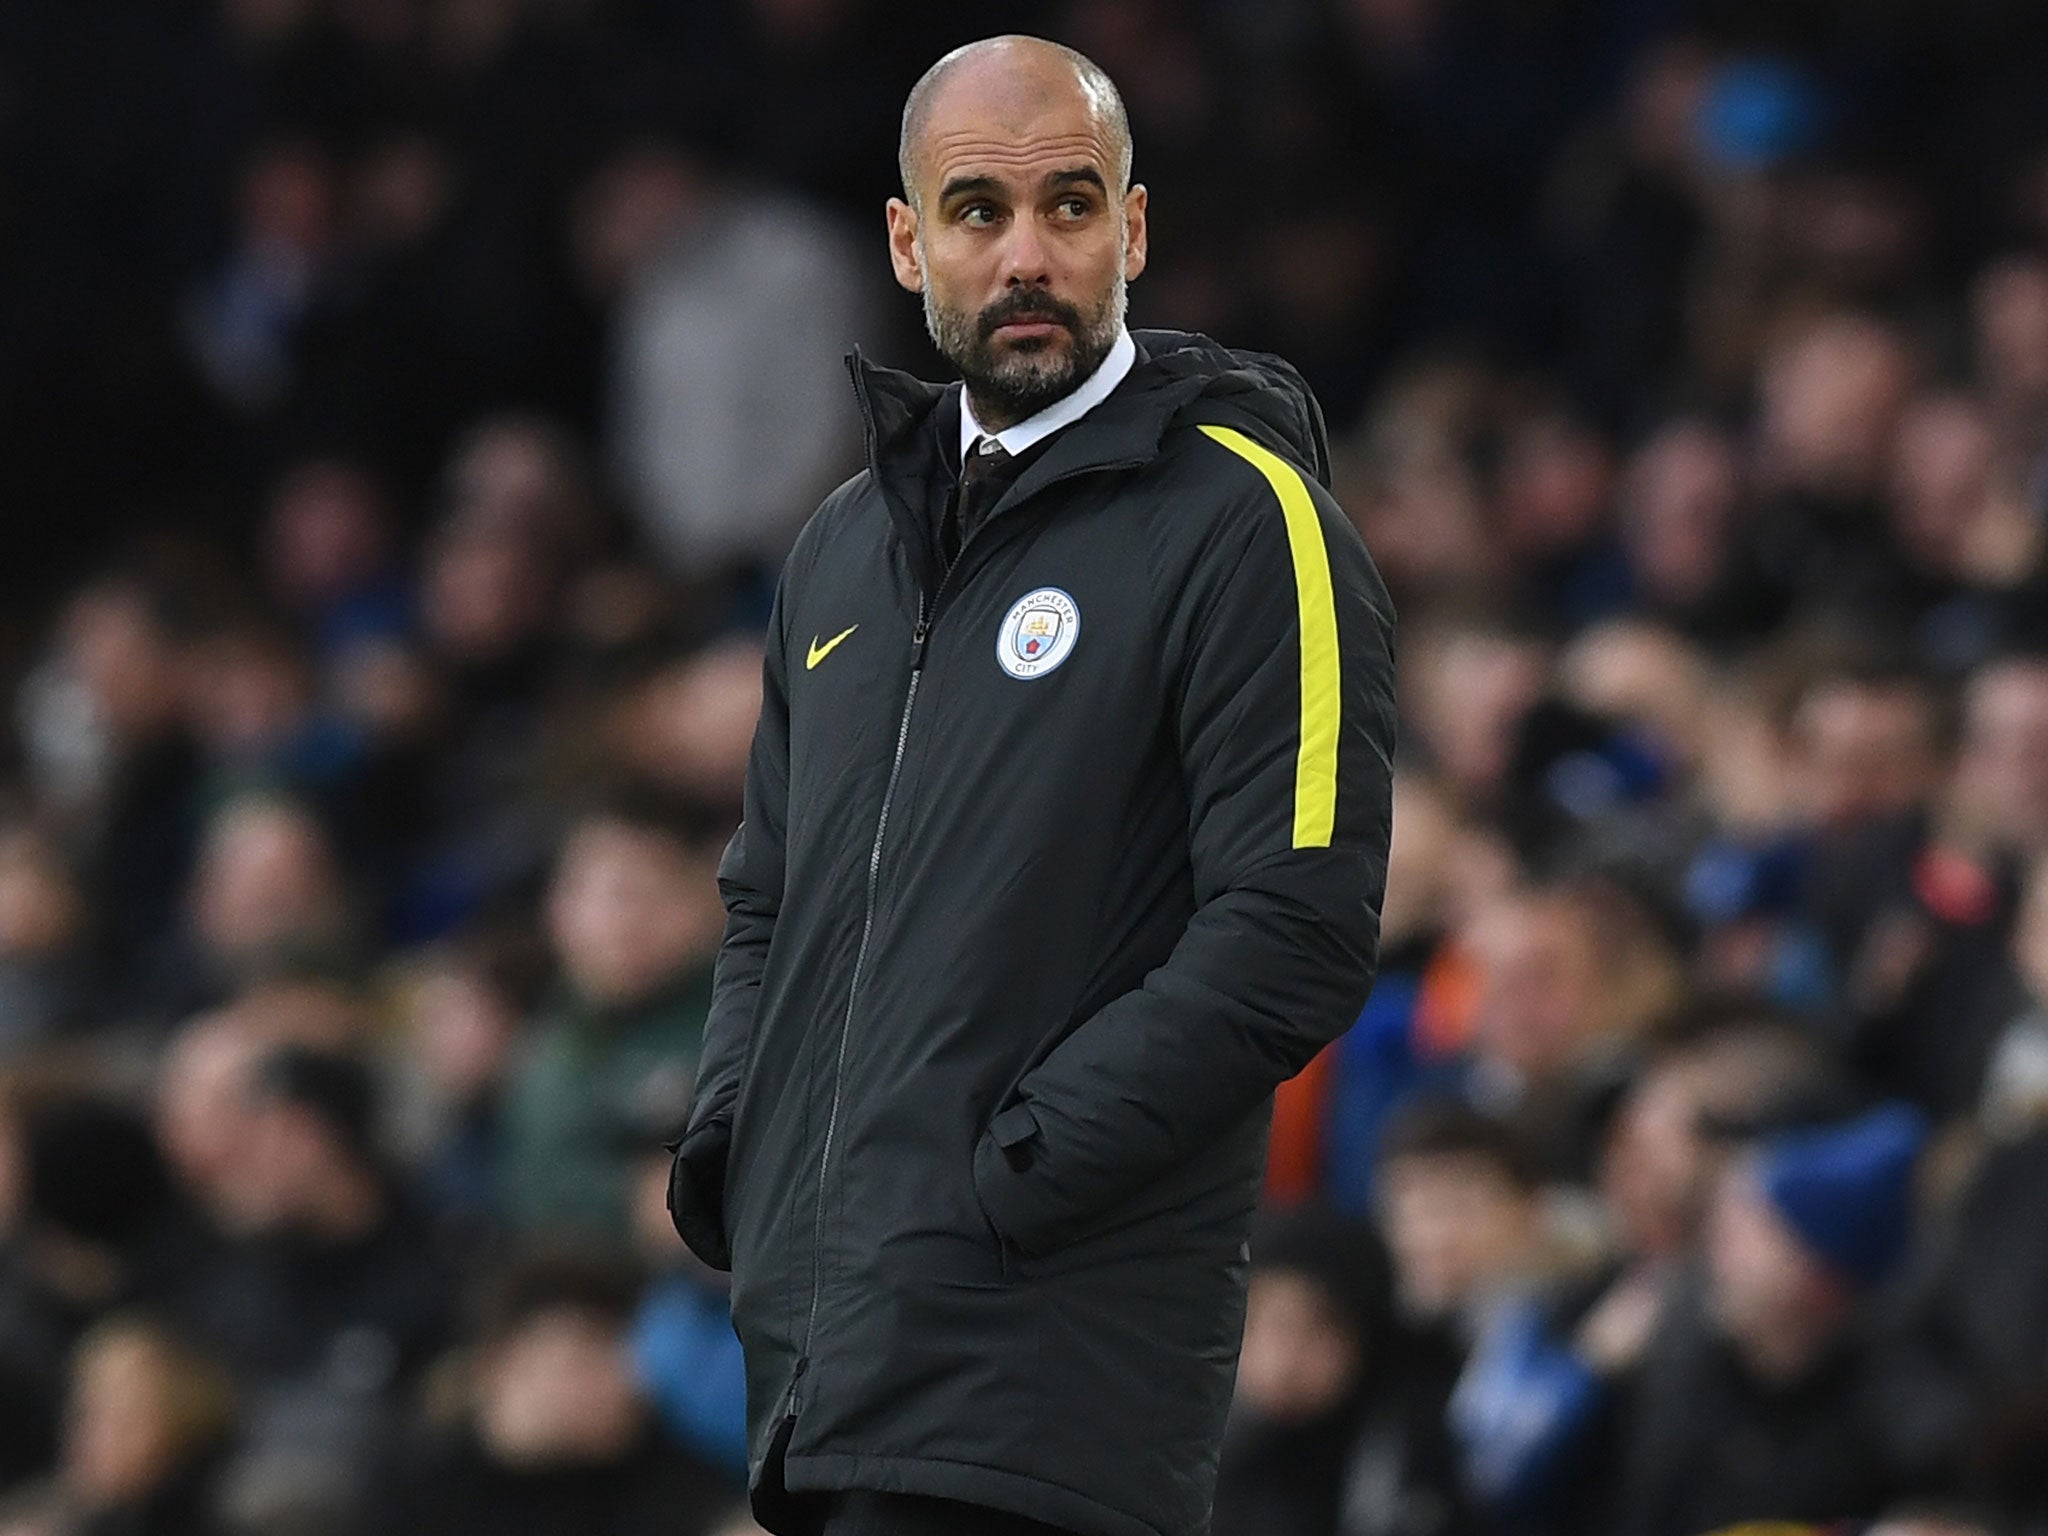 Pep Guardiola has implemented his Catalonian style on Manchester City the resulted in a backroom clear-out